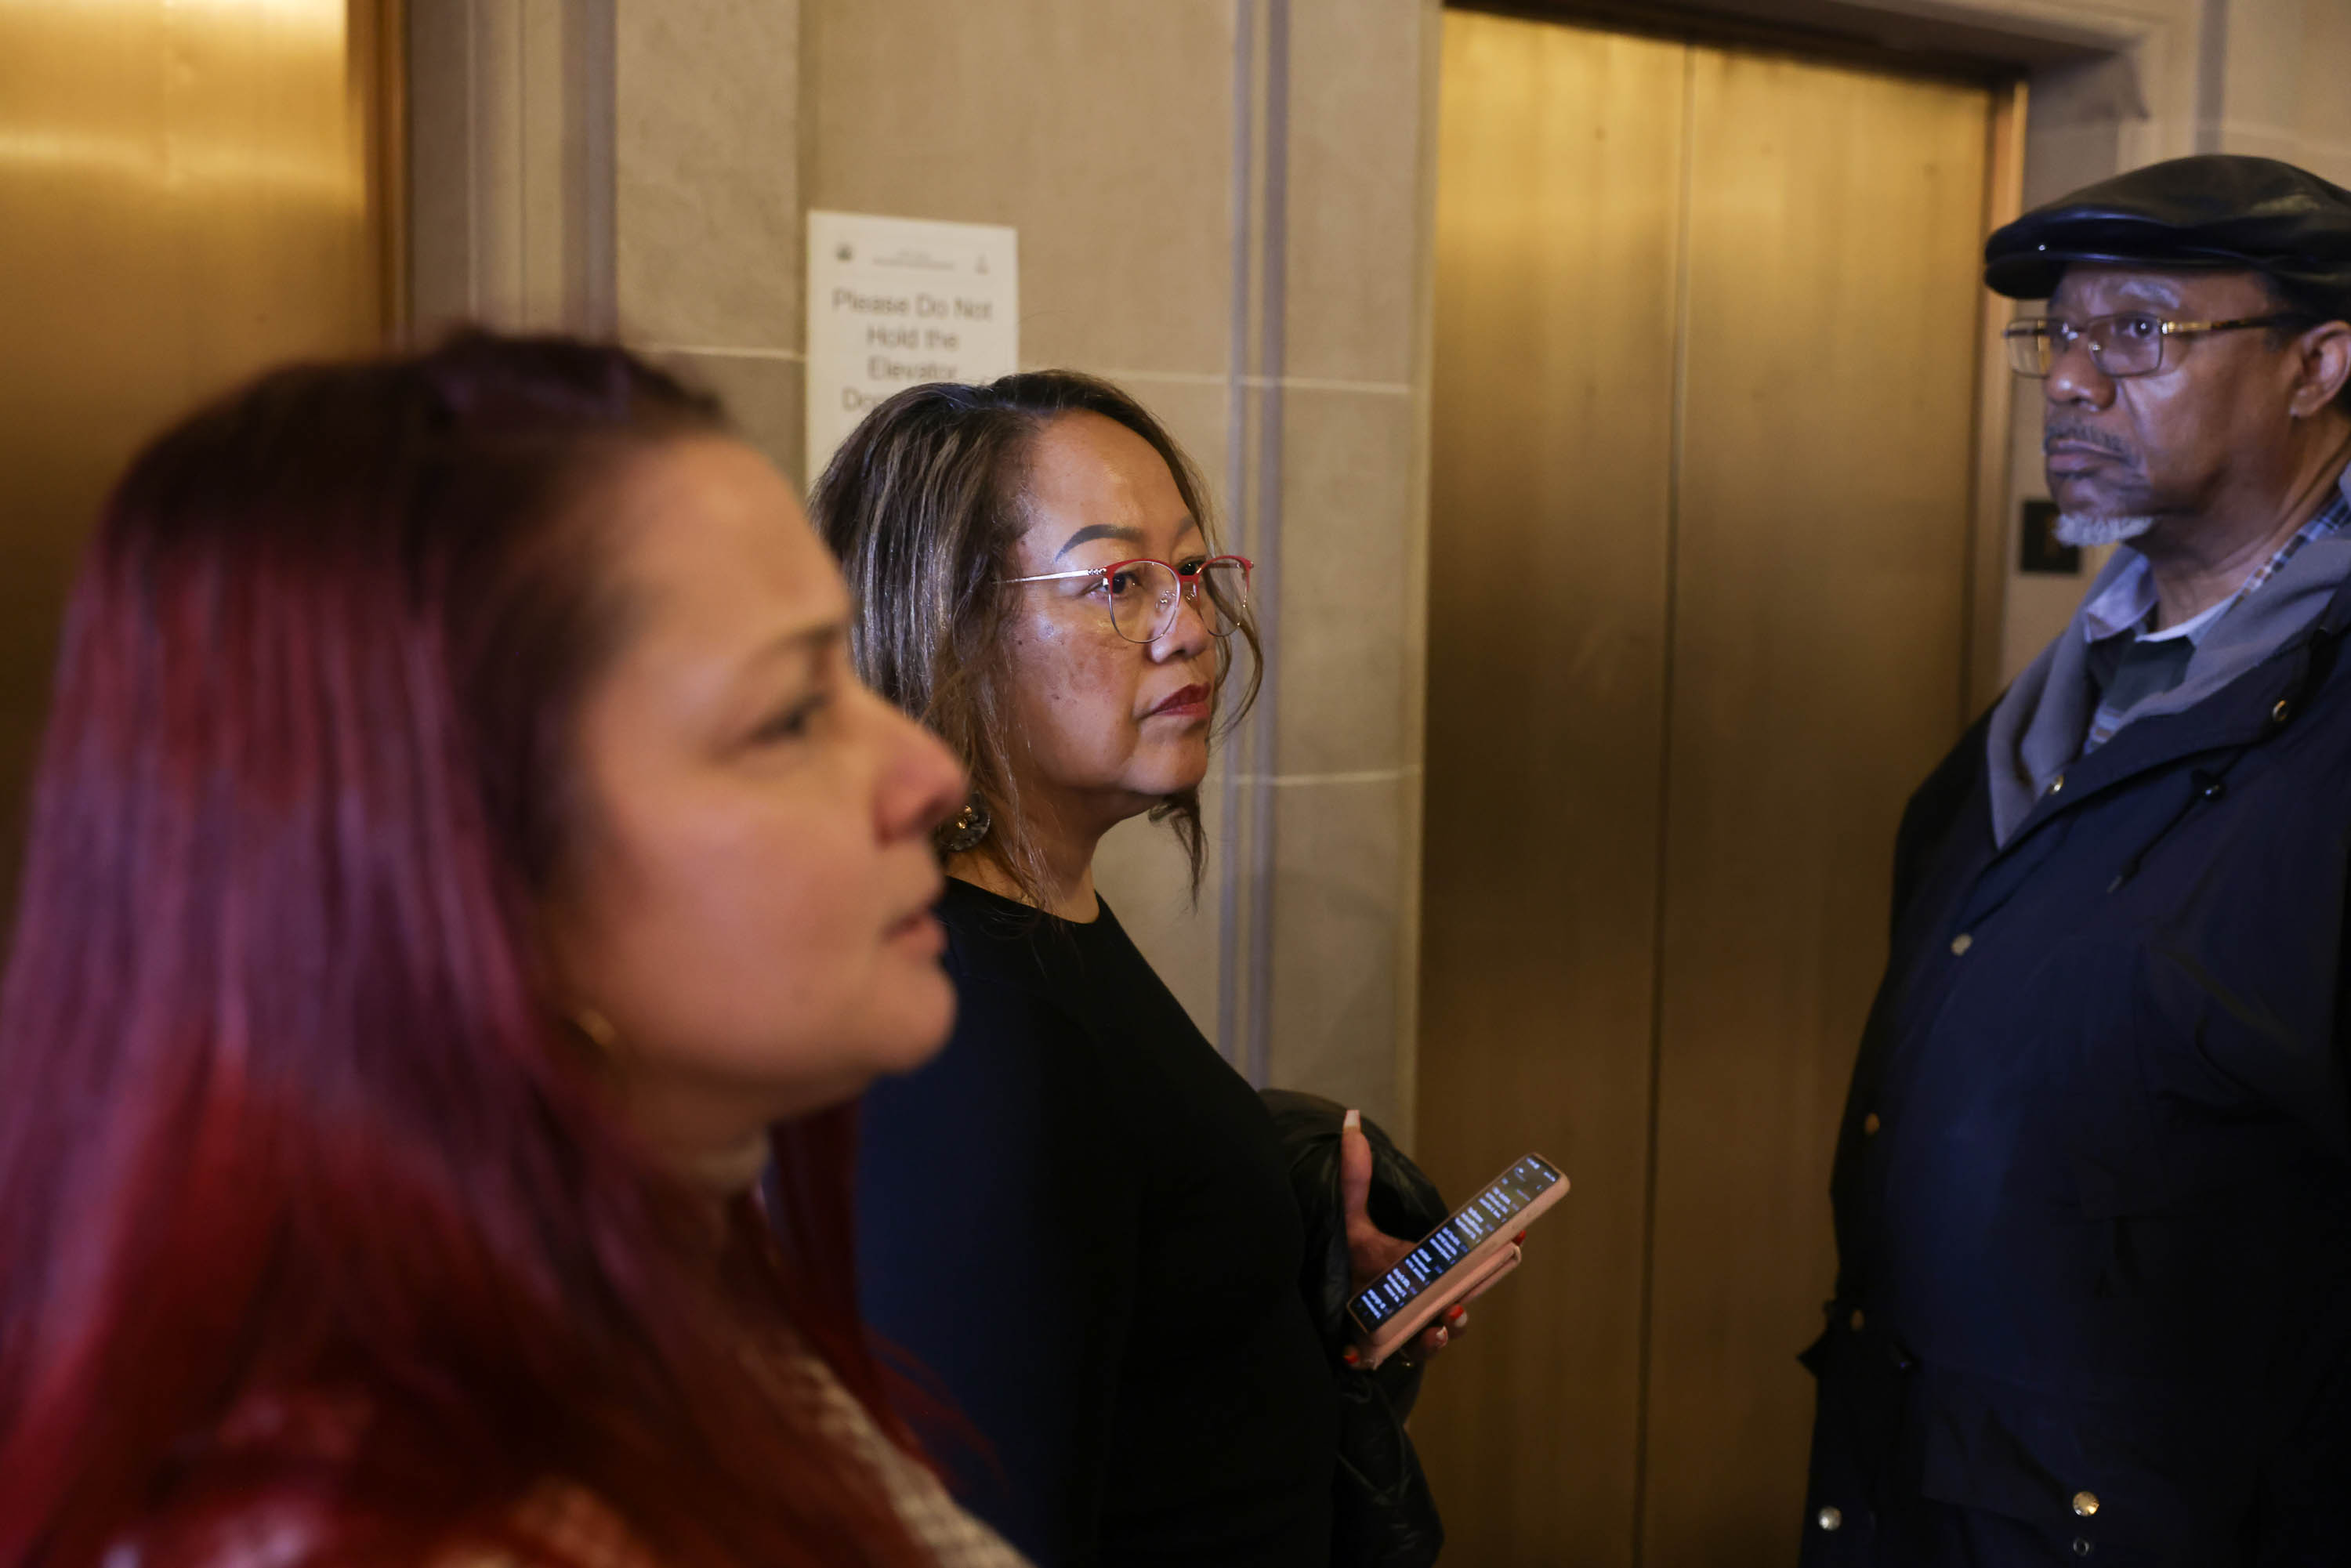 Three adults stand near an elevator, one holding a phone, with concerned expressions.